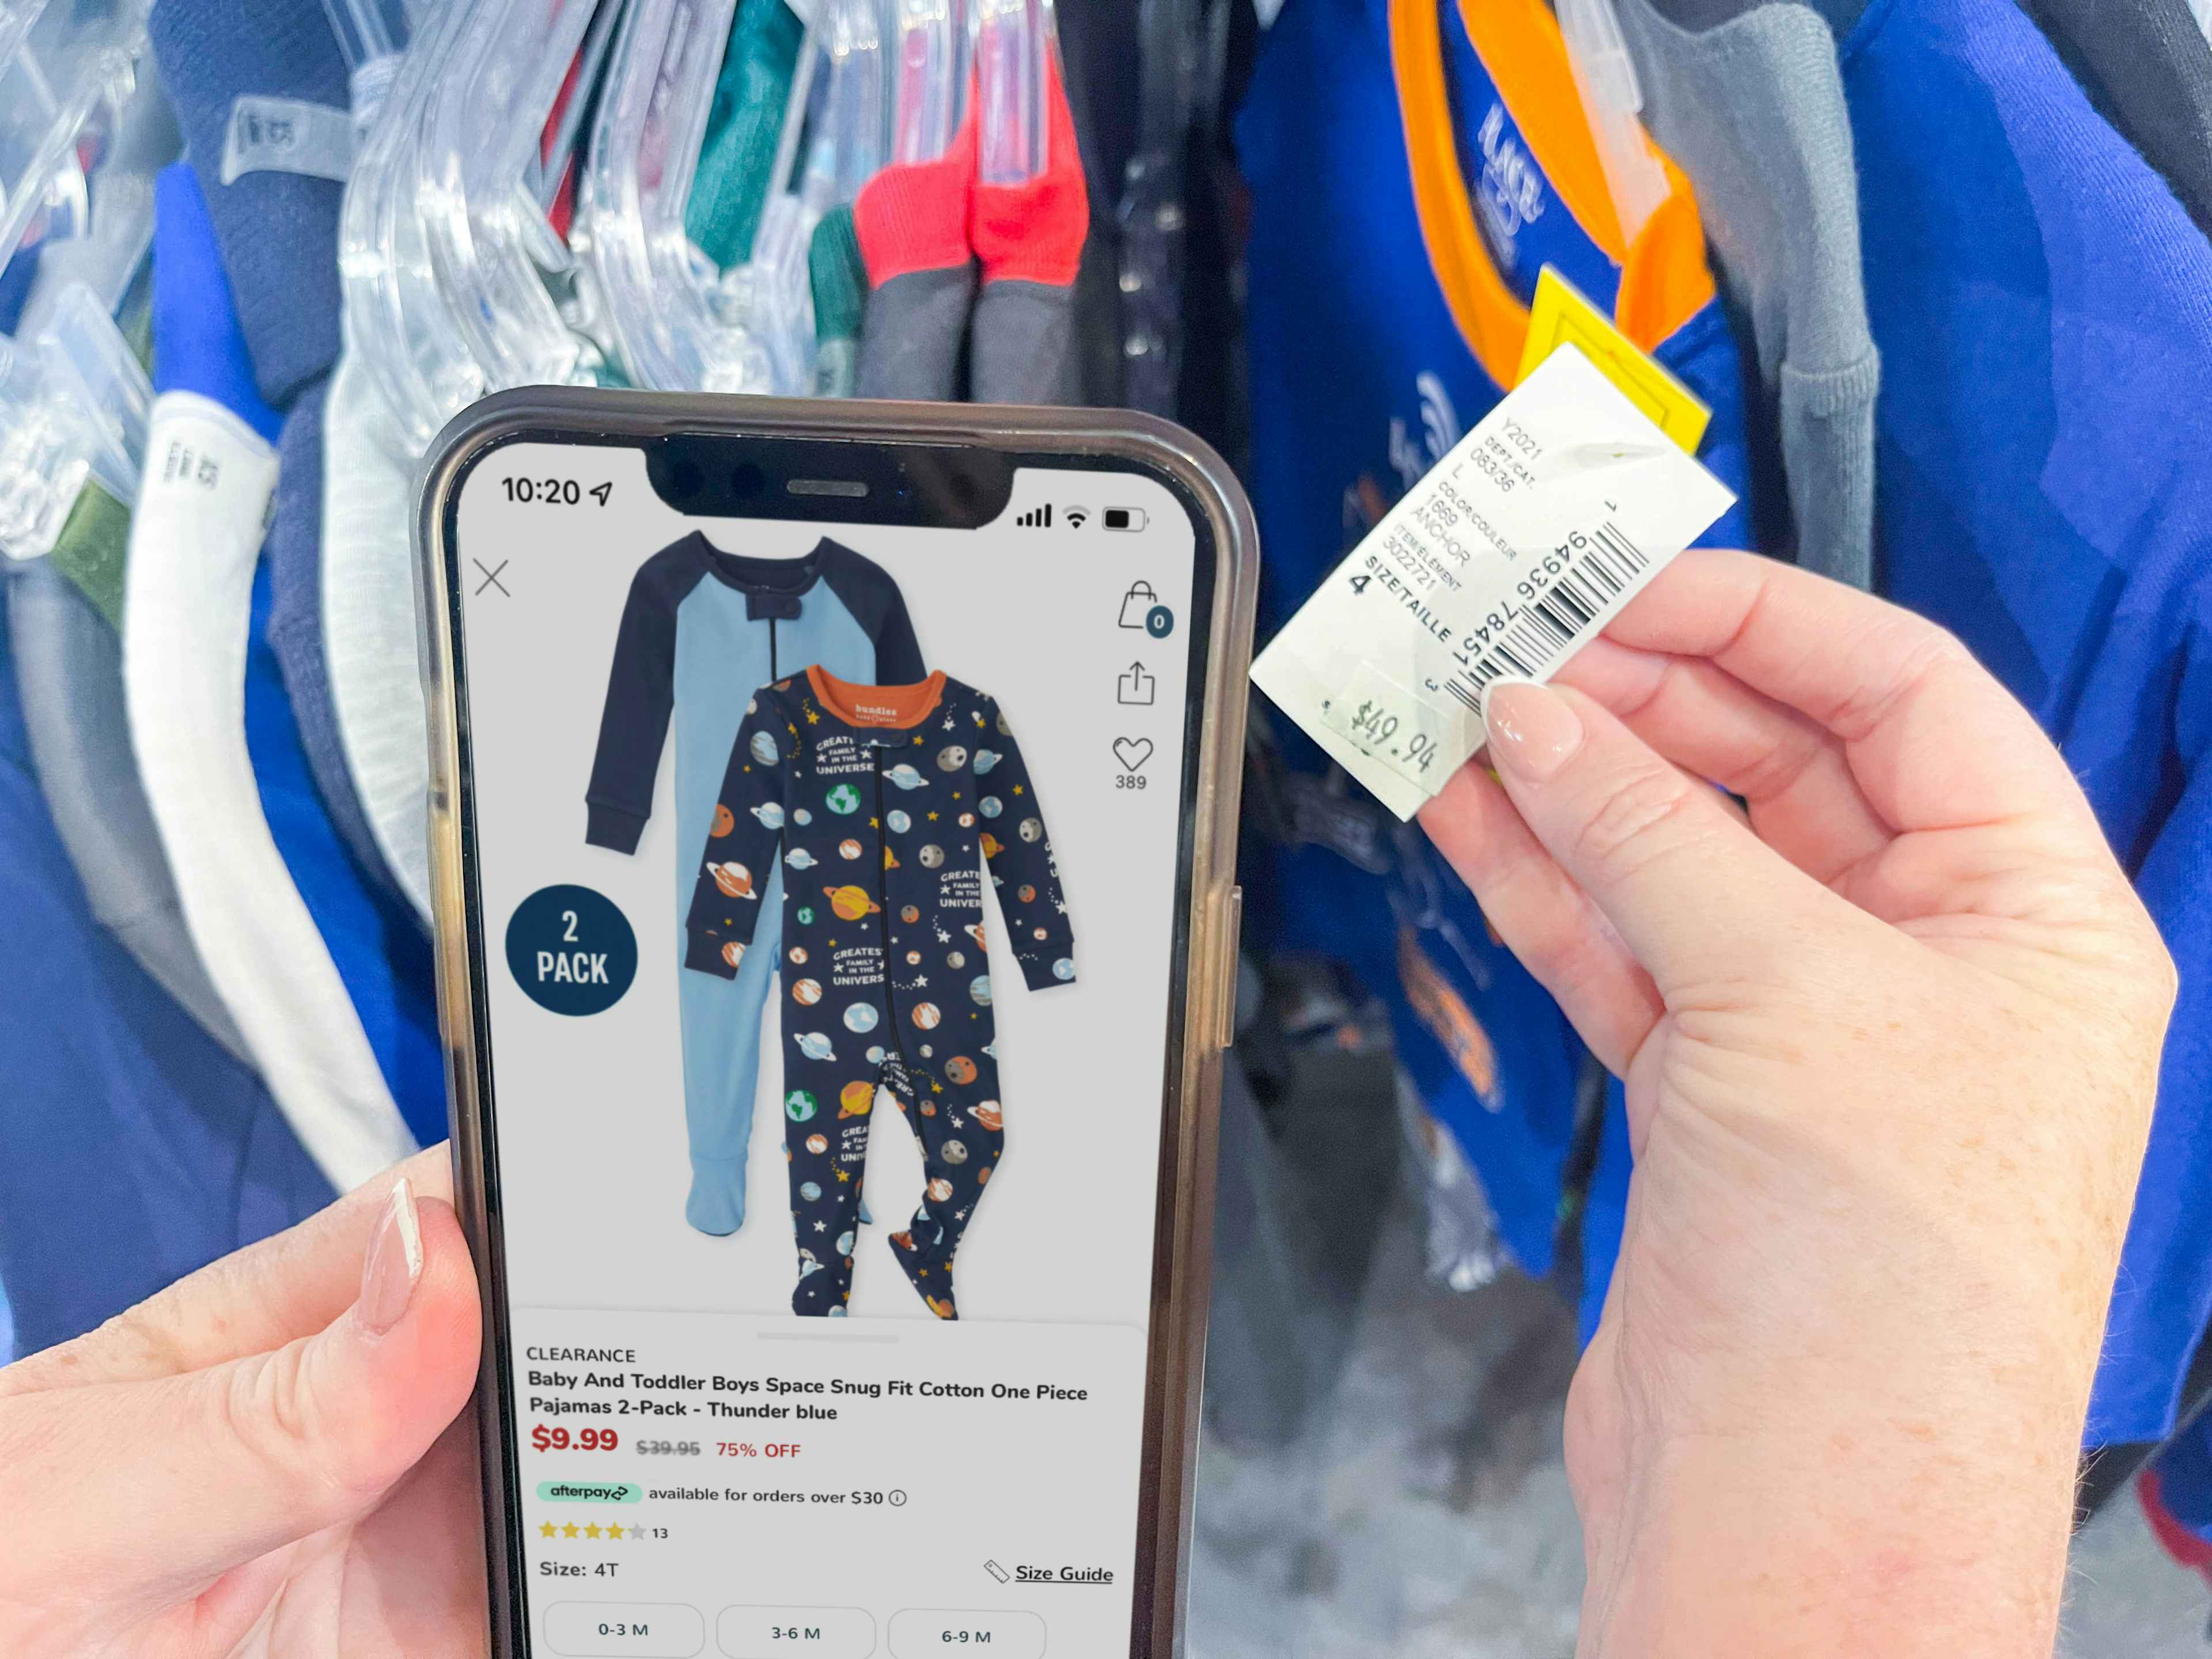 a person holding cellphone comparing on the price tag